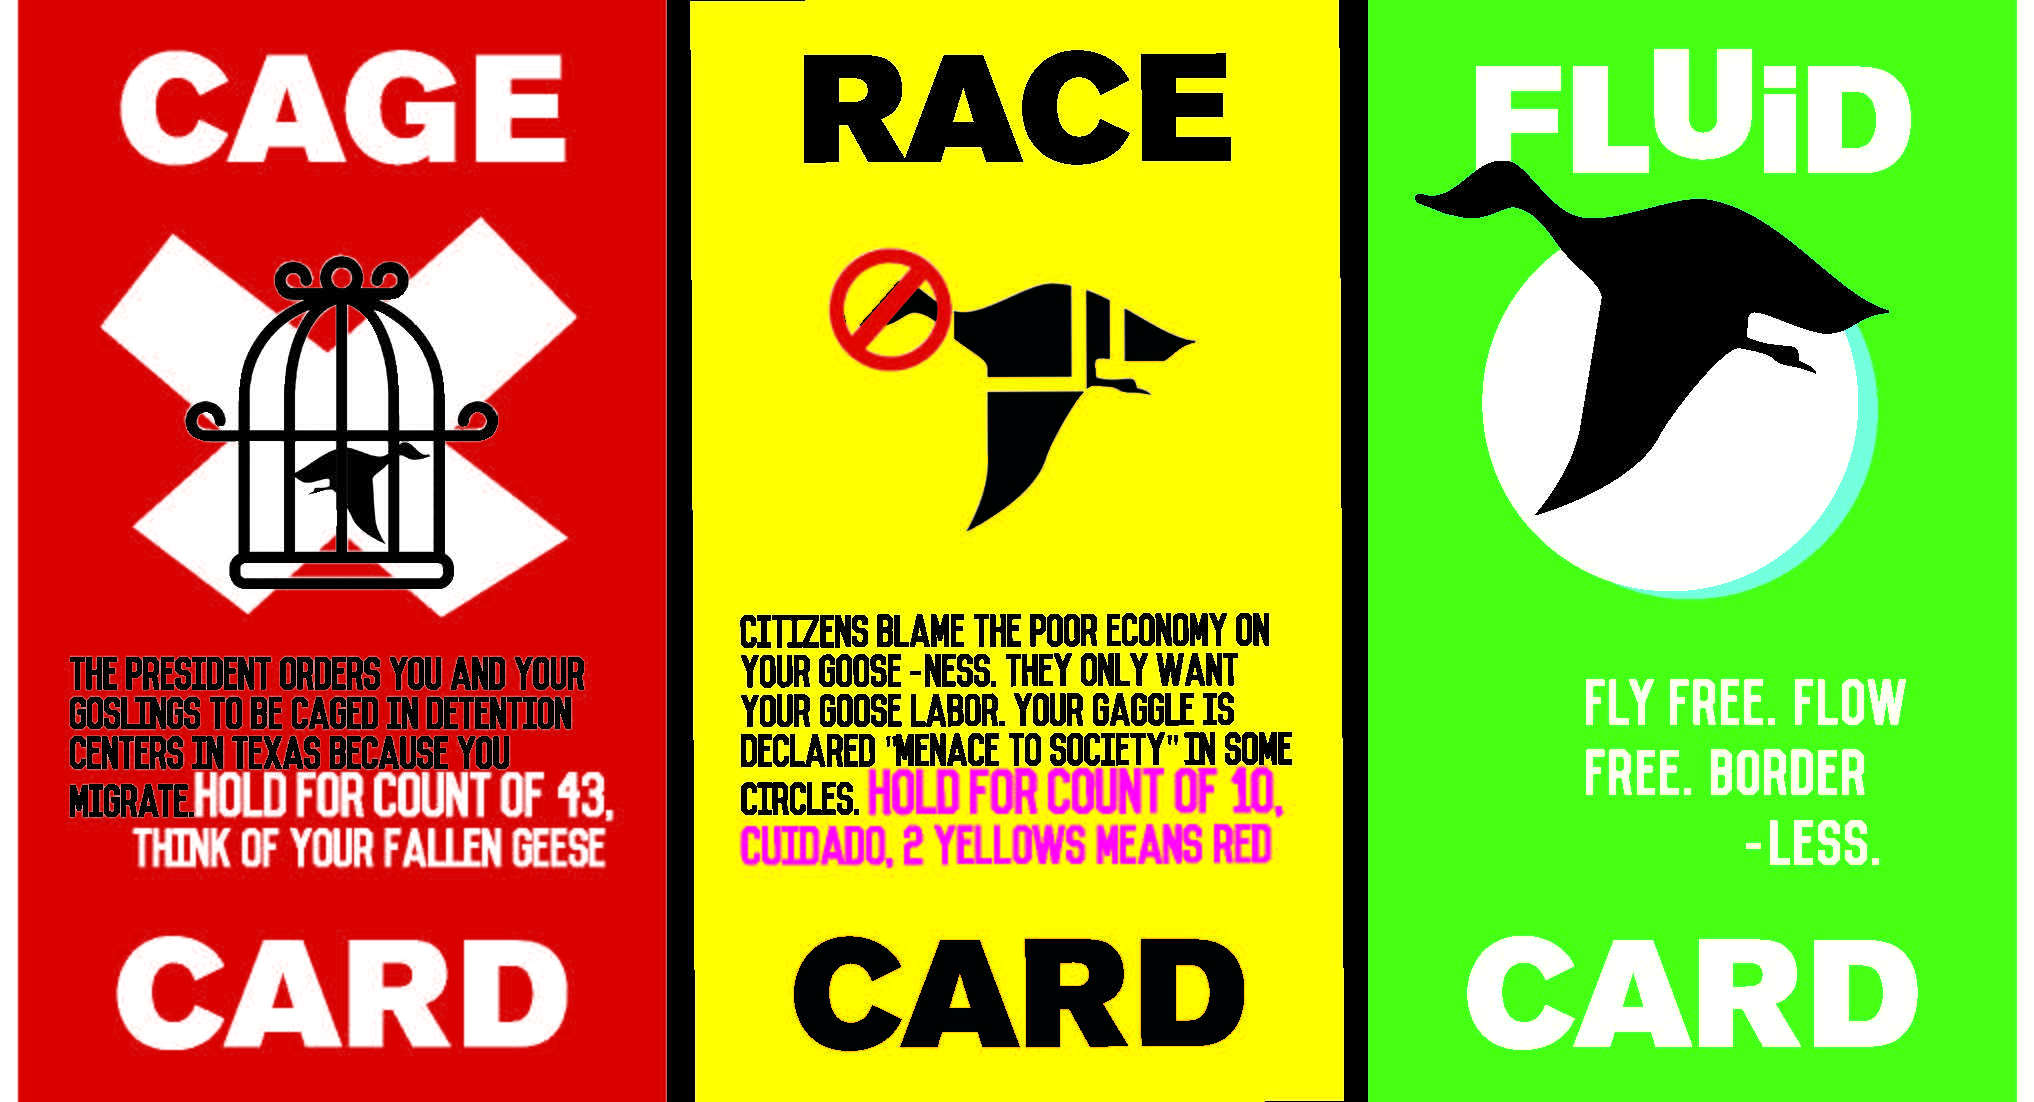 Three playing cards are presented in a horizontal row. The first card on the left is “The Cage Card.” It is red and features a bold white X mark with a small black silhouette of a goose in a cage superimposed on top. It reads, “The President orders you and your goslings to be caged in detention centers in Texas because you migrate. Hold for count of 43, think of your fallen geese.” The center card is a yellow “Race Card” and has a black silhouette of a goose flying with a red X in a circle over its head. The goose is slightly larger than the first card’s good but this goose body has a cutout grid pattern intersecting it. The card reads, “Citizens blame poor economy on your goose-ness. They only want your goose labor. Your gaggle is declared a ‘menace to society’ in some circles. Hold for count of 10, cuidado, 2 yellows means red.” The last card on the right is the green “Fluid Card.” The word “Fluid” is wavy. The black silhouette of the goose is noticeably larger than the first two cards and is flying in front of a white moon. The card reads “Fly free. Flow free. Border-less.”